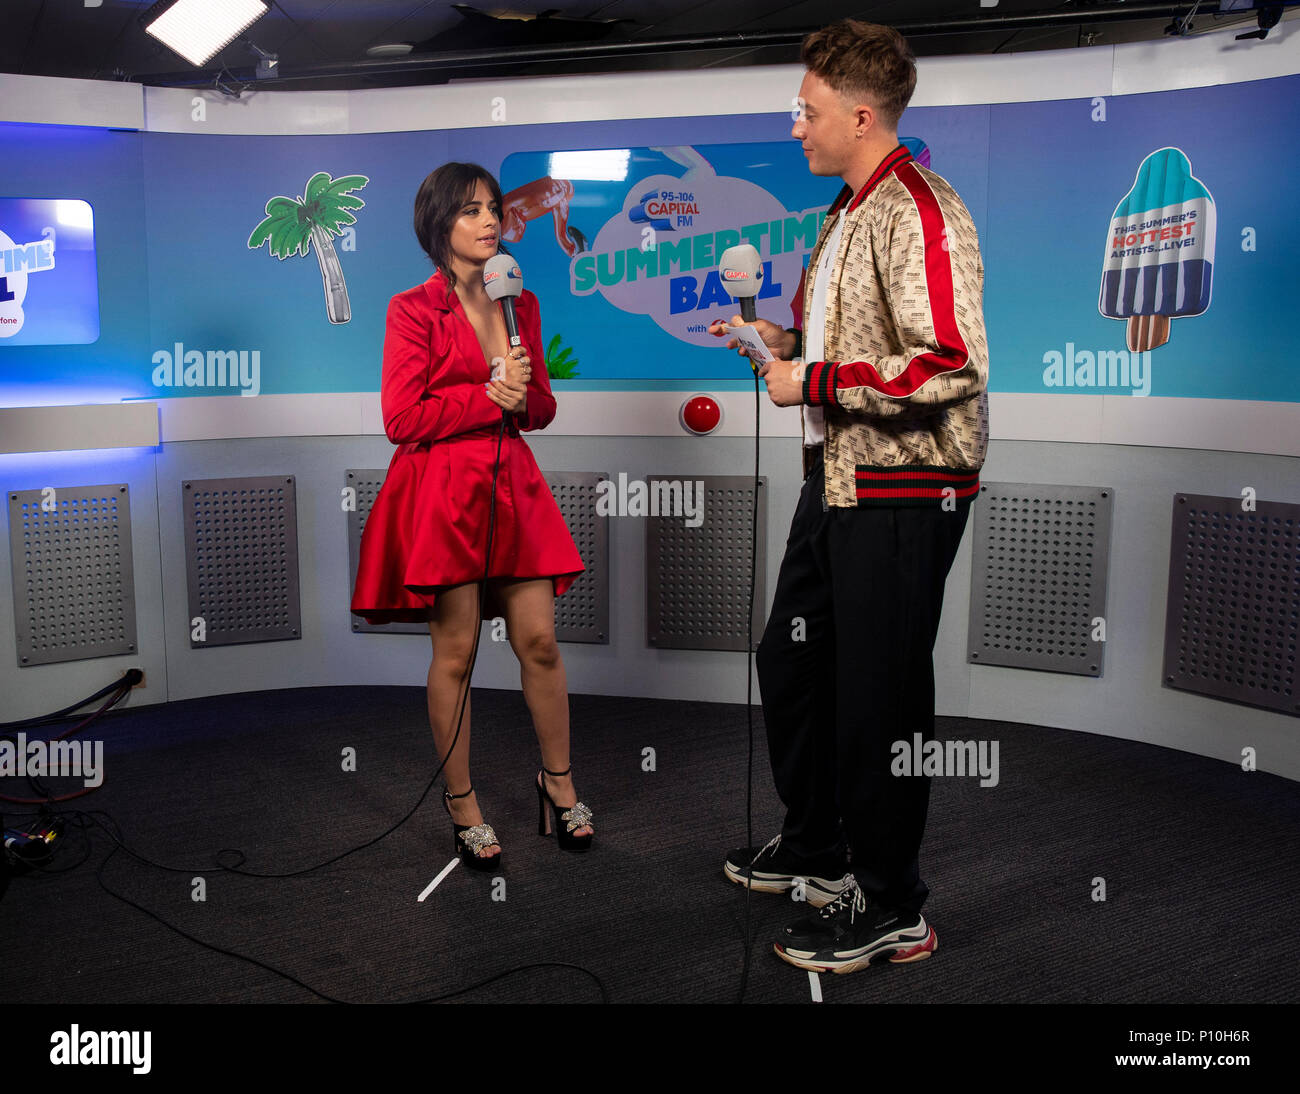 Camila Cabello and Roman Kemp in the on air studio during Capital's Summertime Ball with Vodafone at Wembley Stadium, London. PRESS ASSOCIATION Photo. This summer's hottest artists performed live for 80,000 Capital listeners at Wembley Stadium at the UK's biggest summer party. Performers included Camila Cabello, Shawn Mendes, Rita Ora, Charlie Puth, Jess Glyne, Craig David, Anne-Marie, Rudimental, Sean Paul, Clean Bandit, James Arthur, Sigala, Years & Years, Jax Jones, Raye, Jonas Blue, Mabel, Stefflon Don, Yungen and G-Eazy. Picture date: Saturday June 9, 2018. Photo credit should read: Laure Stock Photo